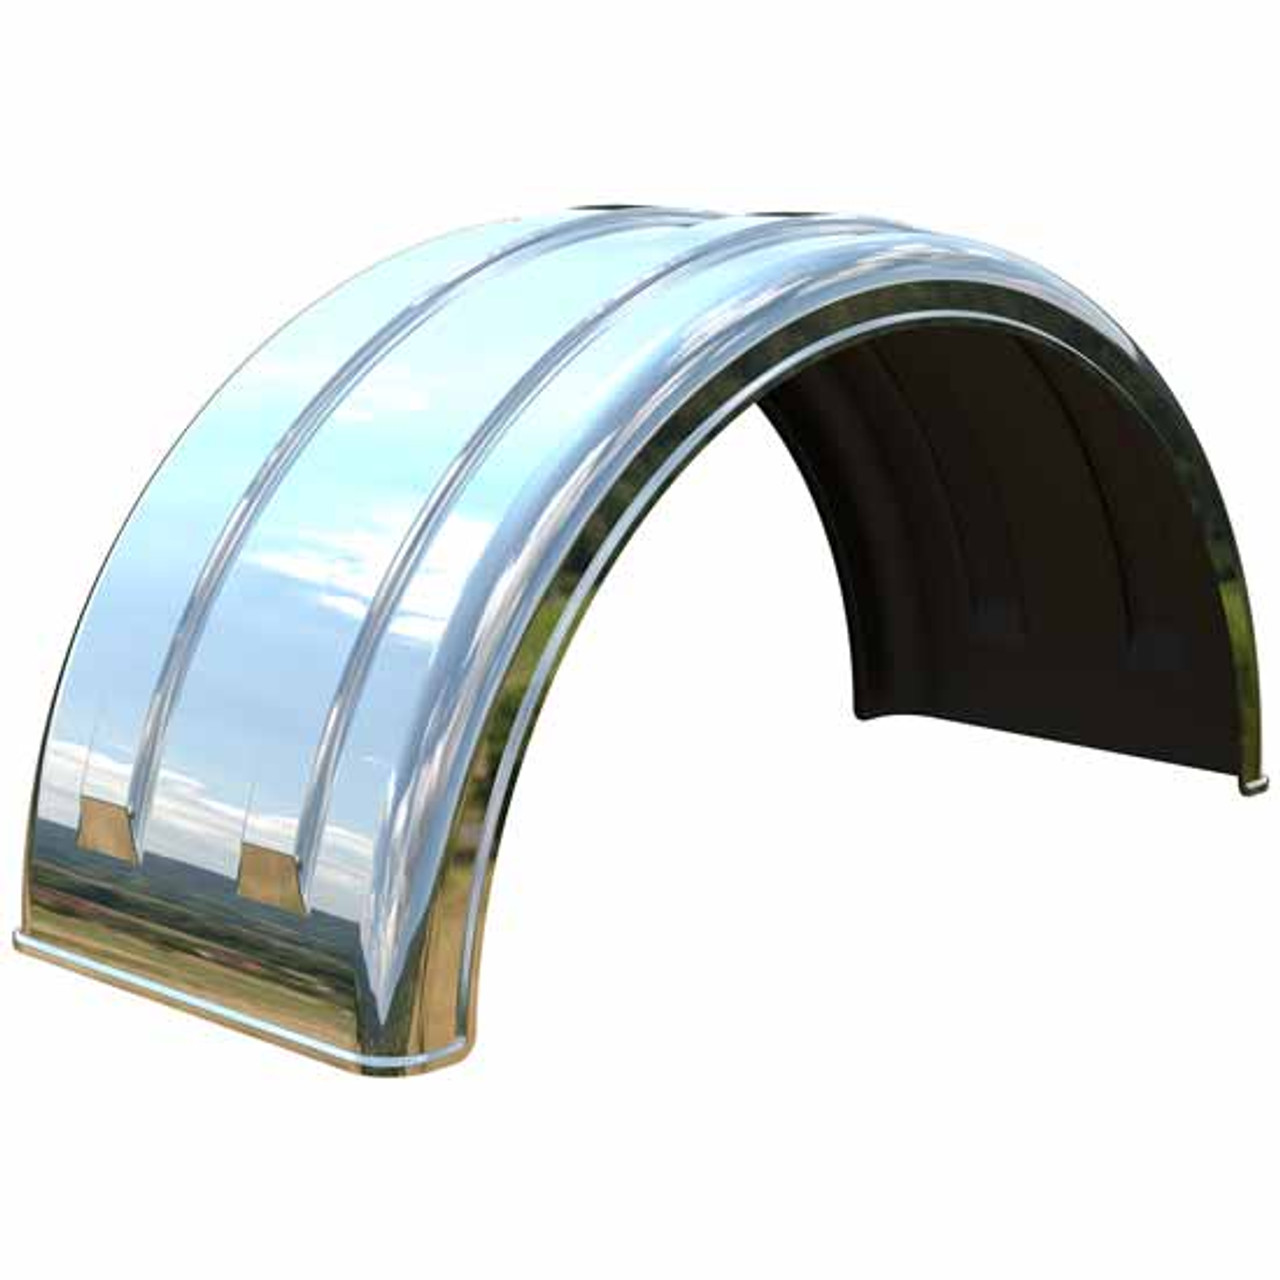 Minimizer Poly Fenders - Silver Mirror Finish For 22.25 Inch & 24.5 Inch  Wide Base Tires - 4 State Trucks